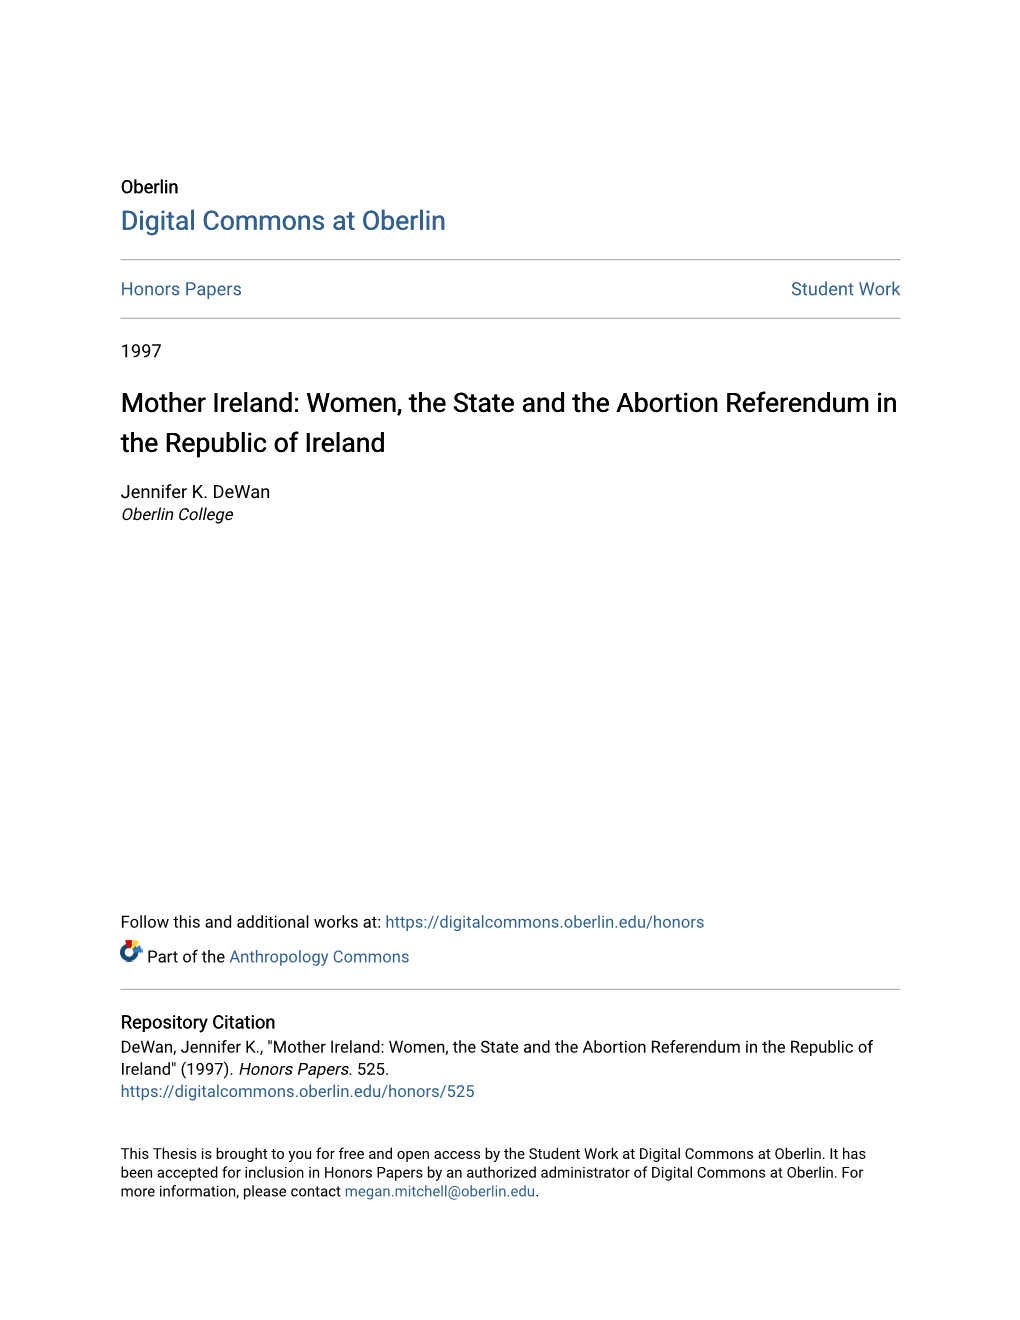 Women, the State and the Abortion Referendum in the Republic of Ireland